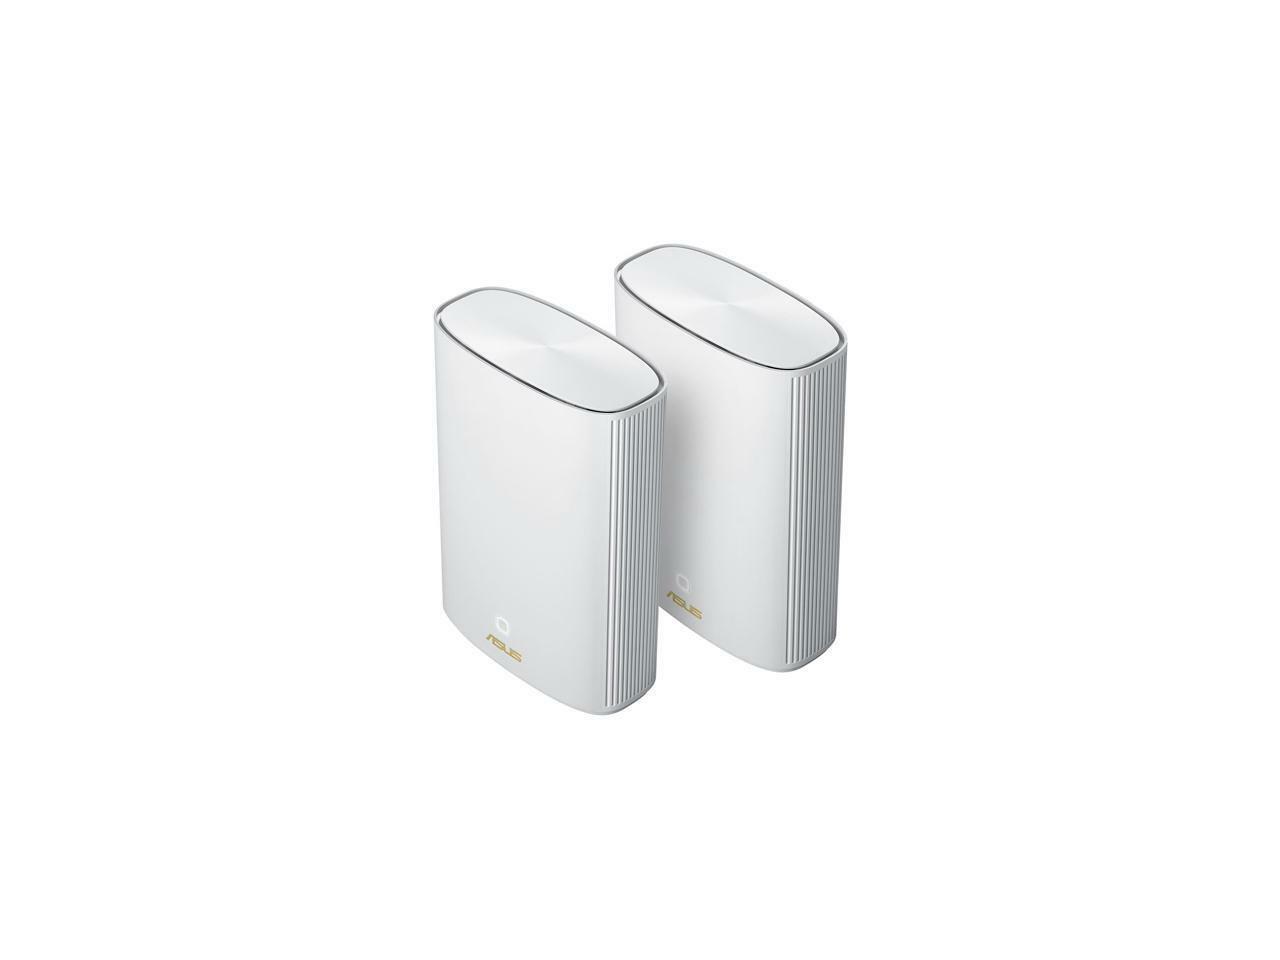 ASUS ZenWiFi AX Hybrid Powerline Mesh WiFi 6 System (XP4) - Whole Home Coverage